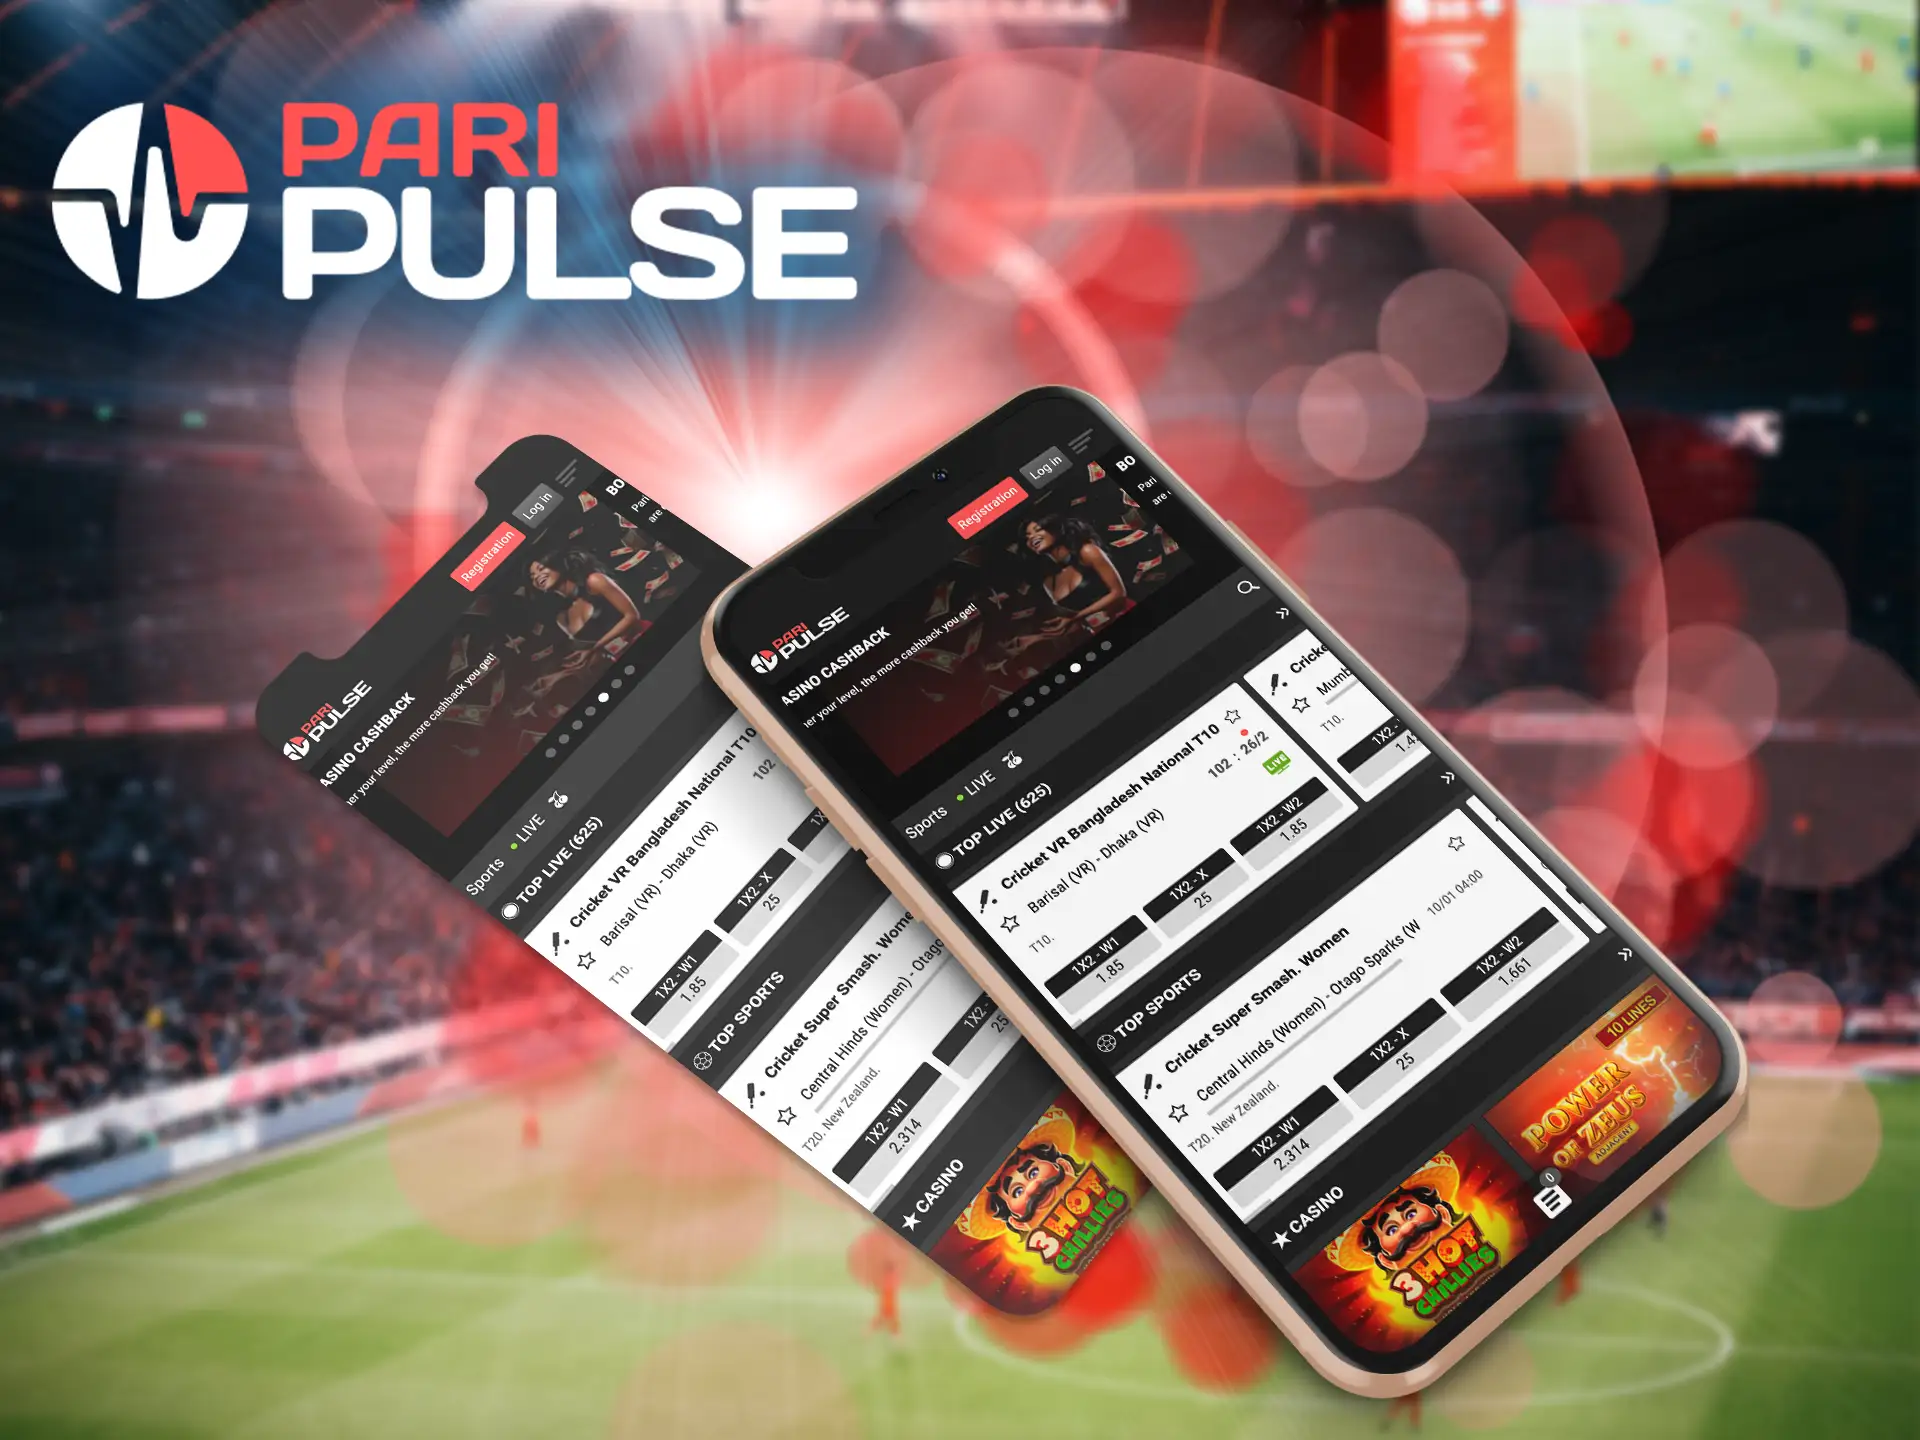 Get the official PariPulse software for conquering new heights in betting anywhere you want, right on your mobile device.